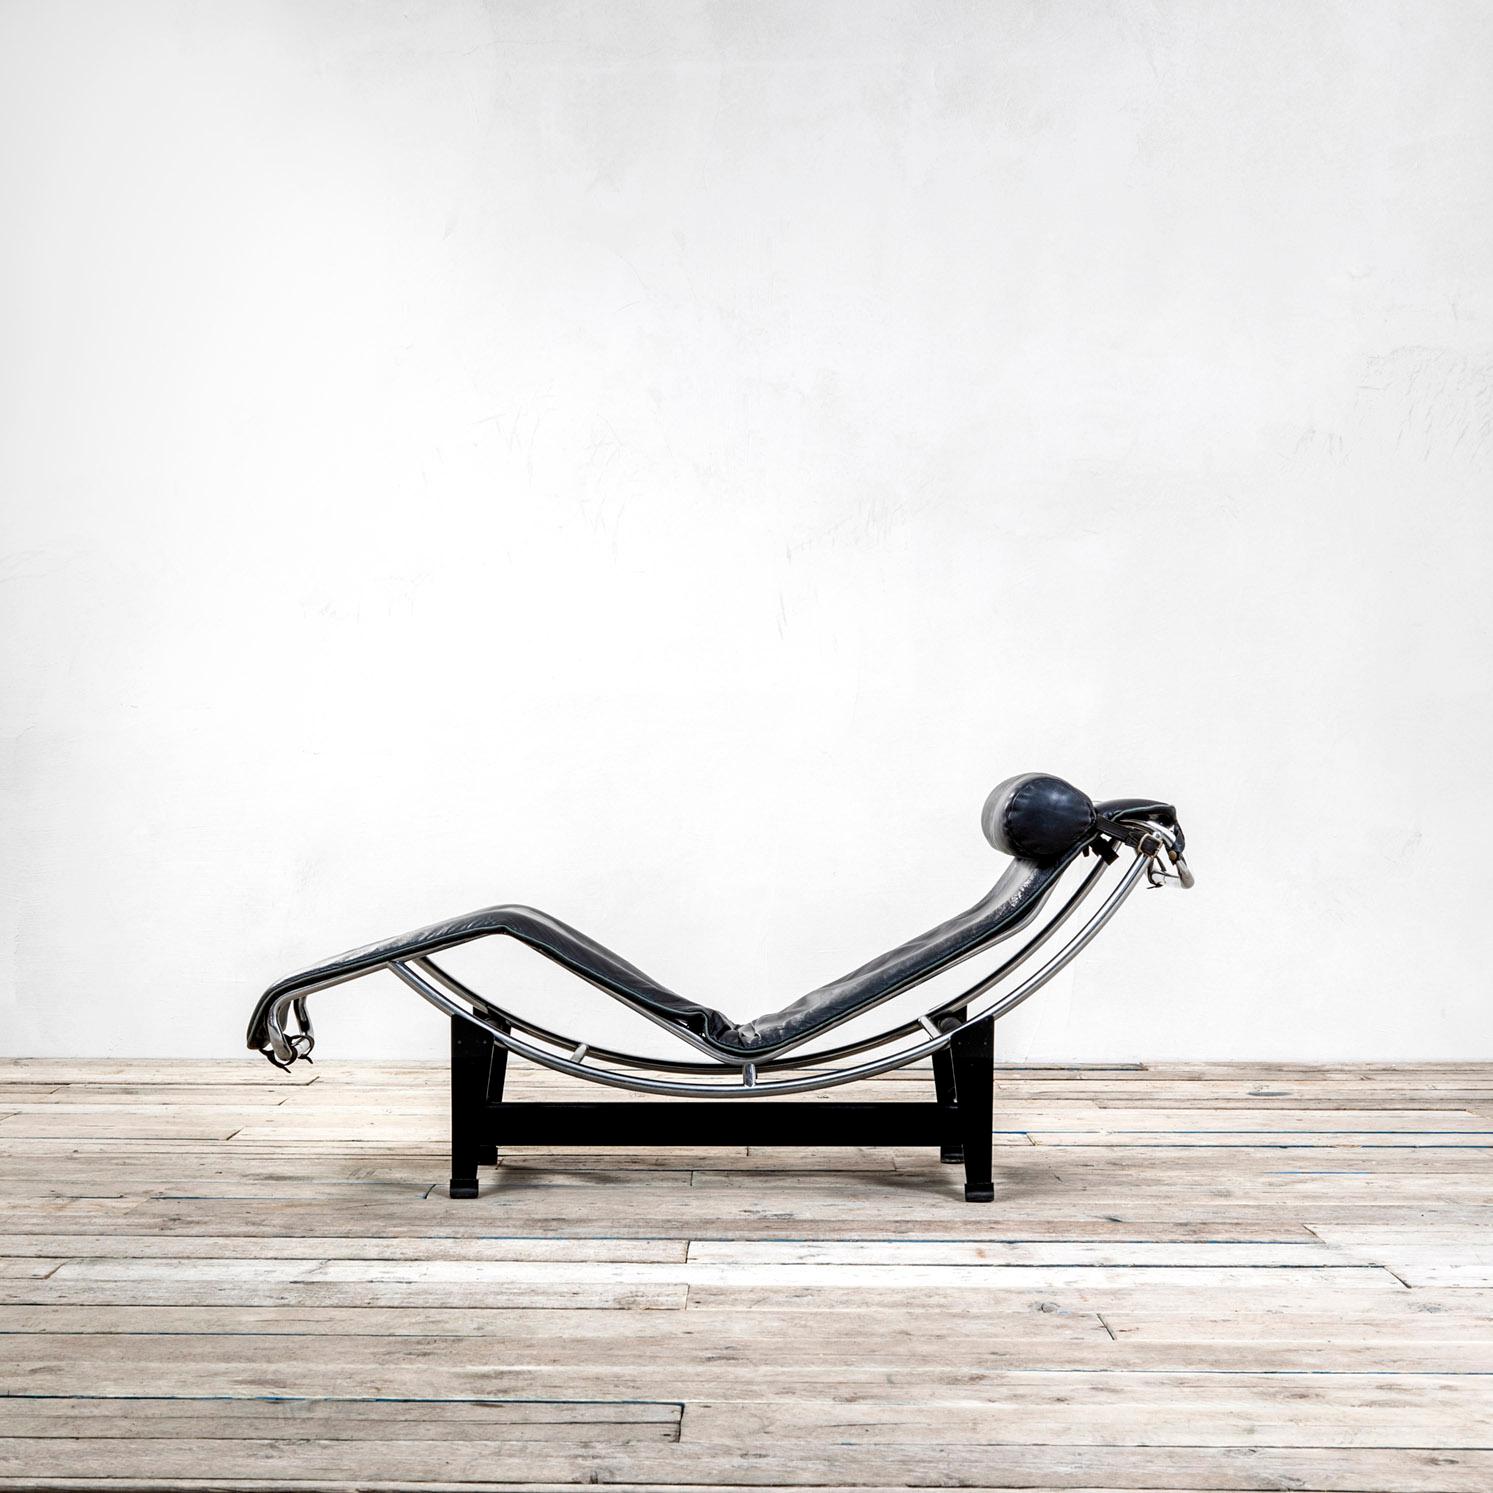 Variable tilting chaise-longue mod. LC4 with chromed tubular structure, lacquered metal supports and leather covering. Designed by Le Corbusier, Pierre Jeanneret and Charlotte Perriand in 1965 for Cassina. The cradle, in trivalent chromed steel,